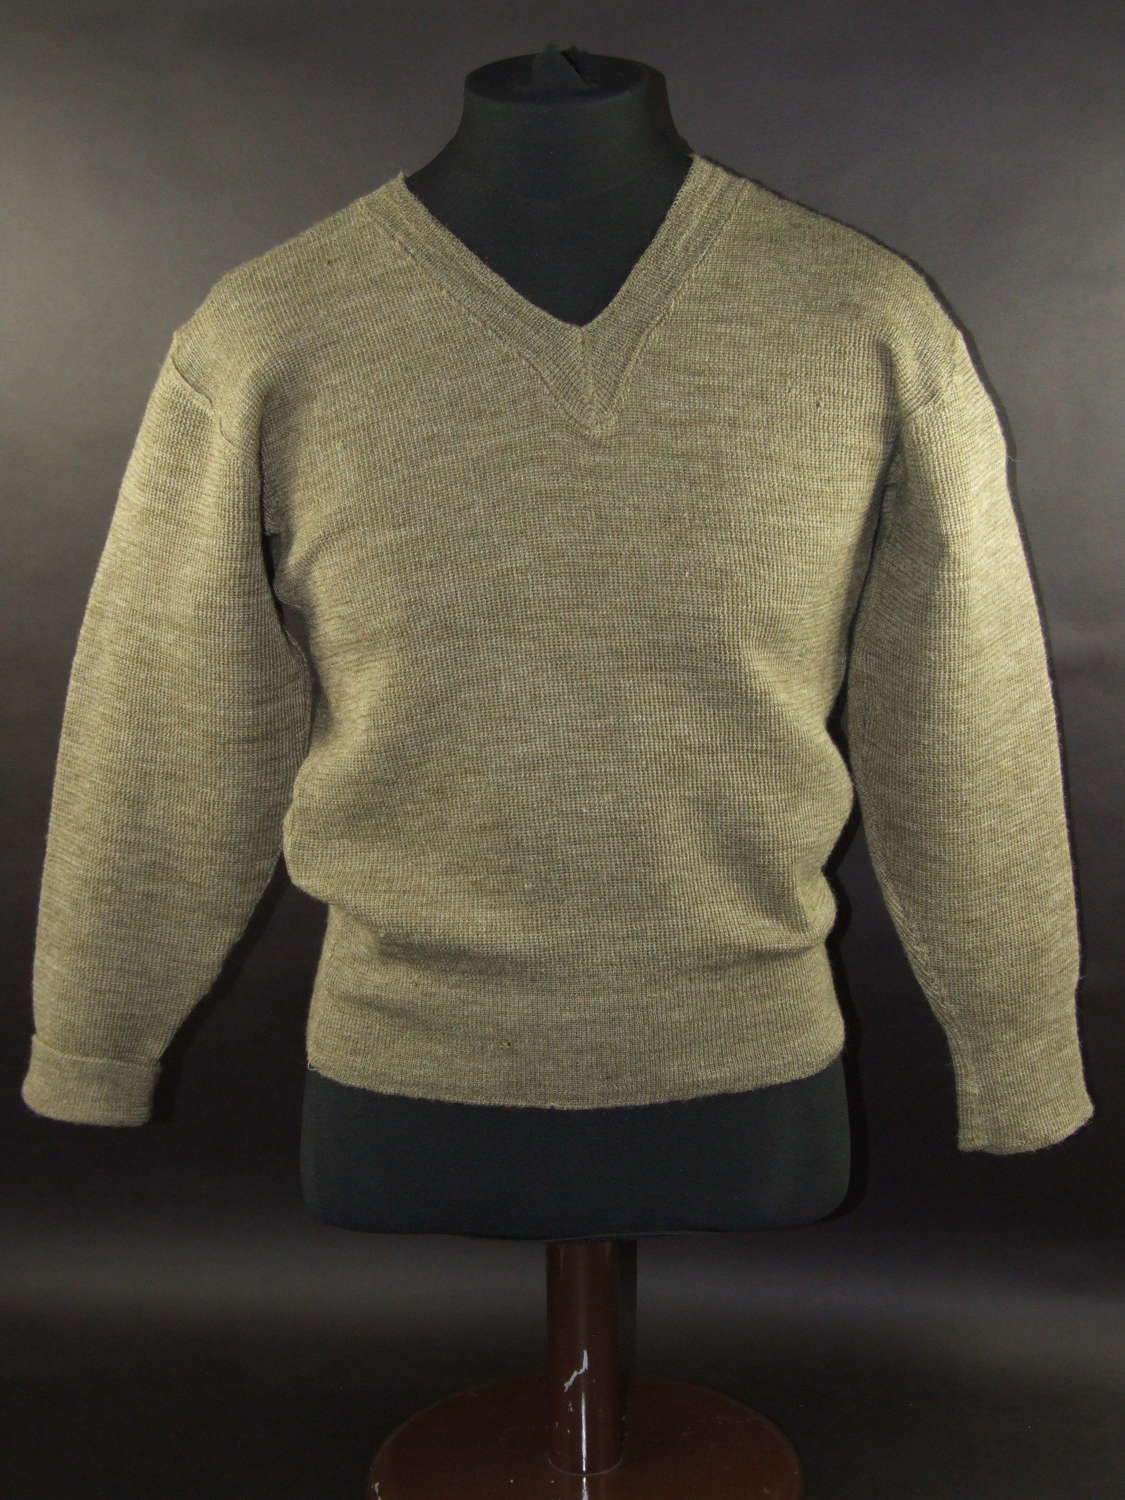 1941 Dated Unissued British Army Sweater